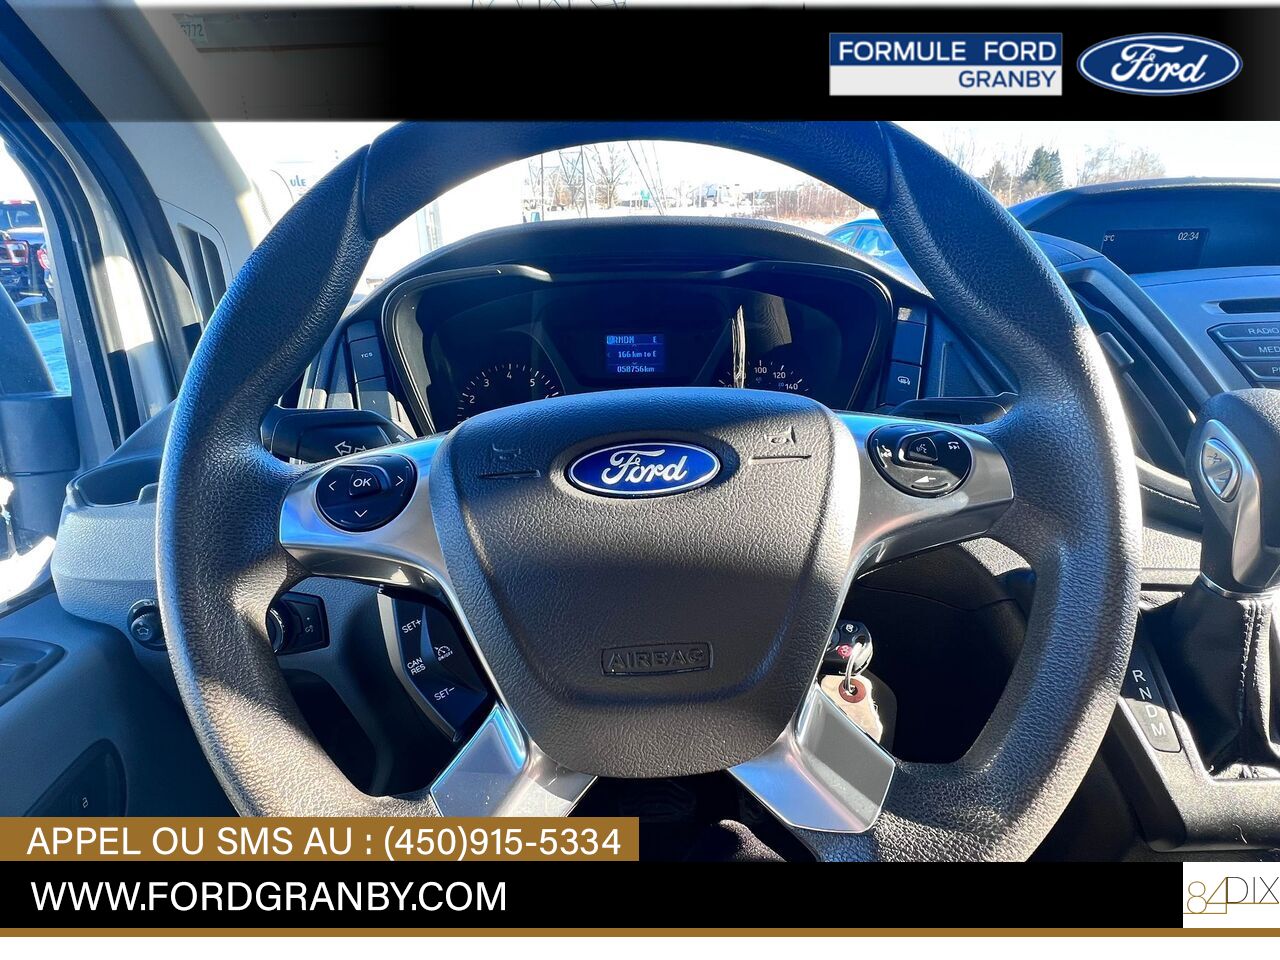 2019 Ford Transit fourgon utilitaire Granby - photo #15